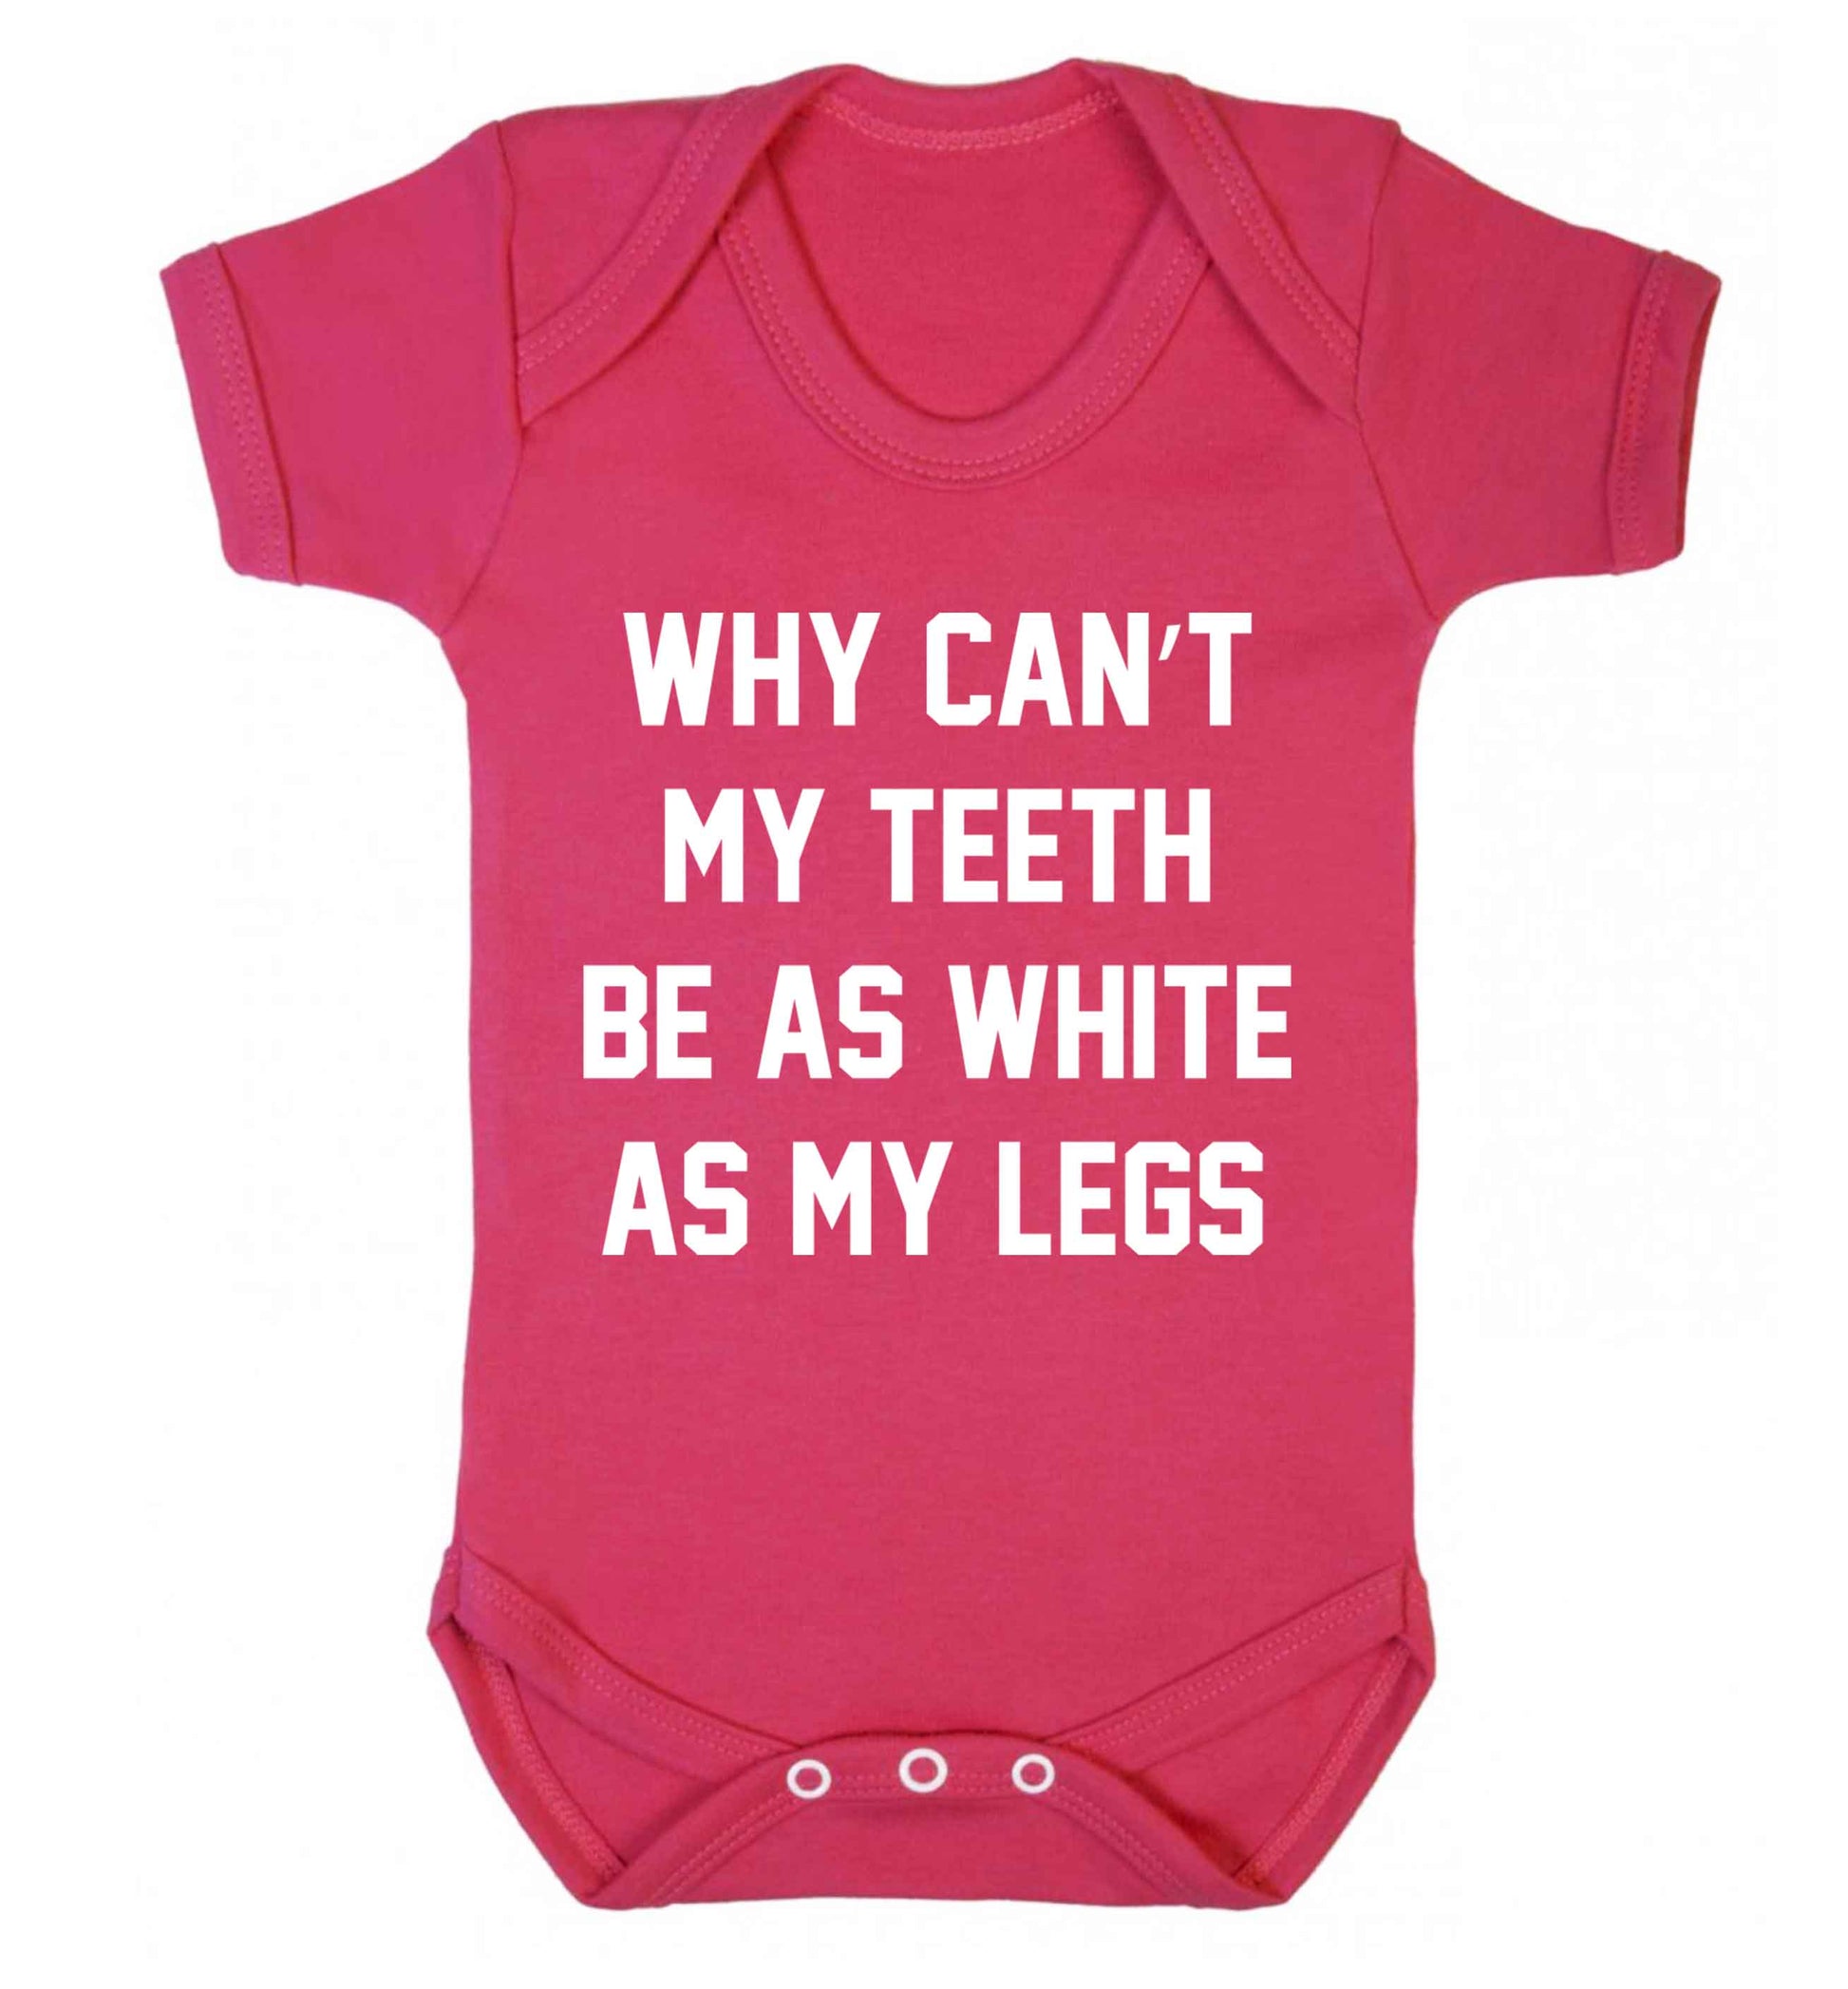 Why can't my teeth be as white as my legs Baby Vest dark pink 18-24 months